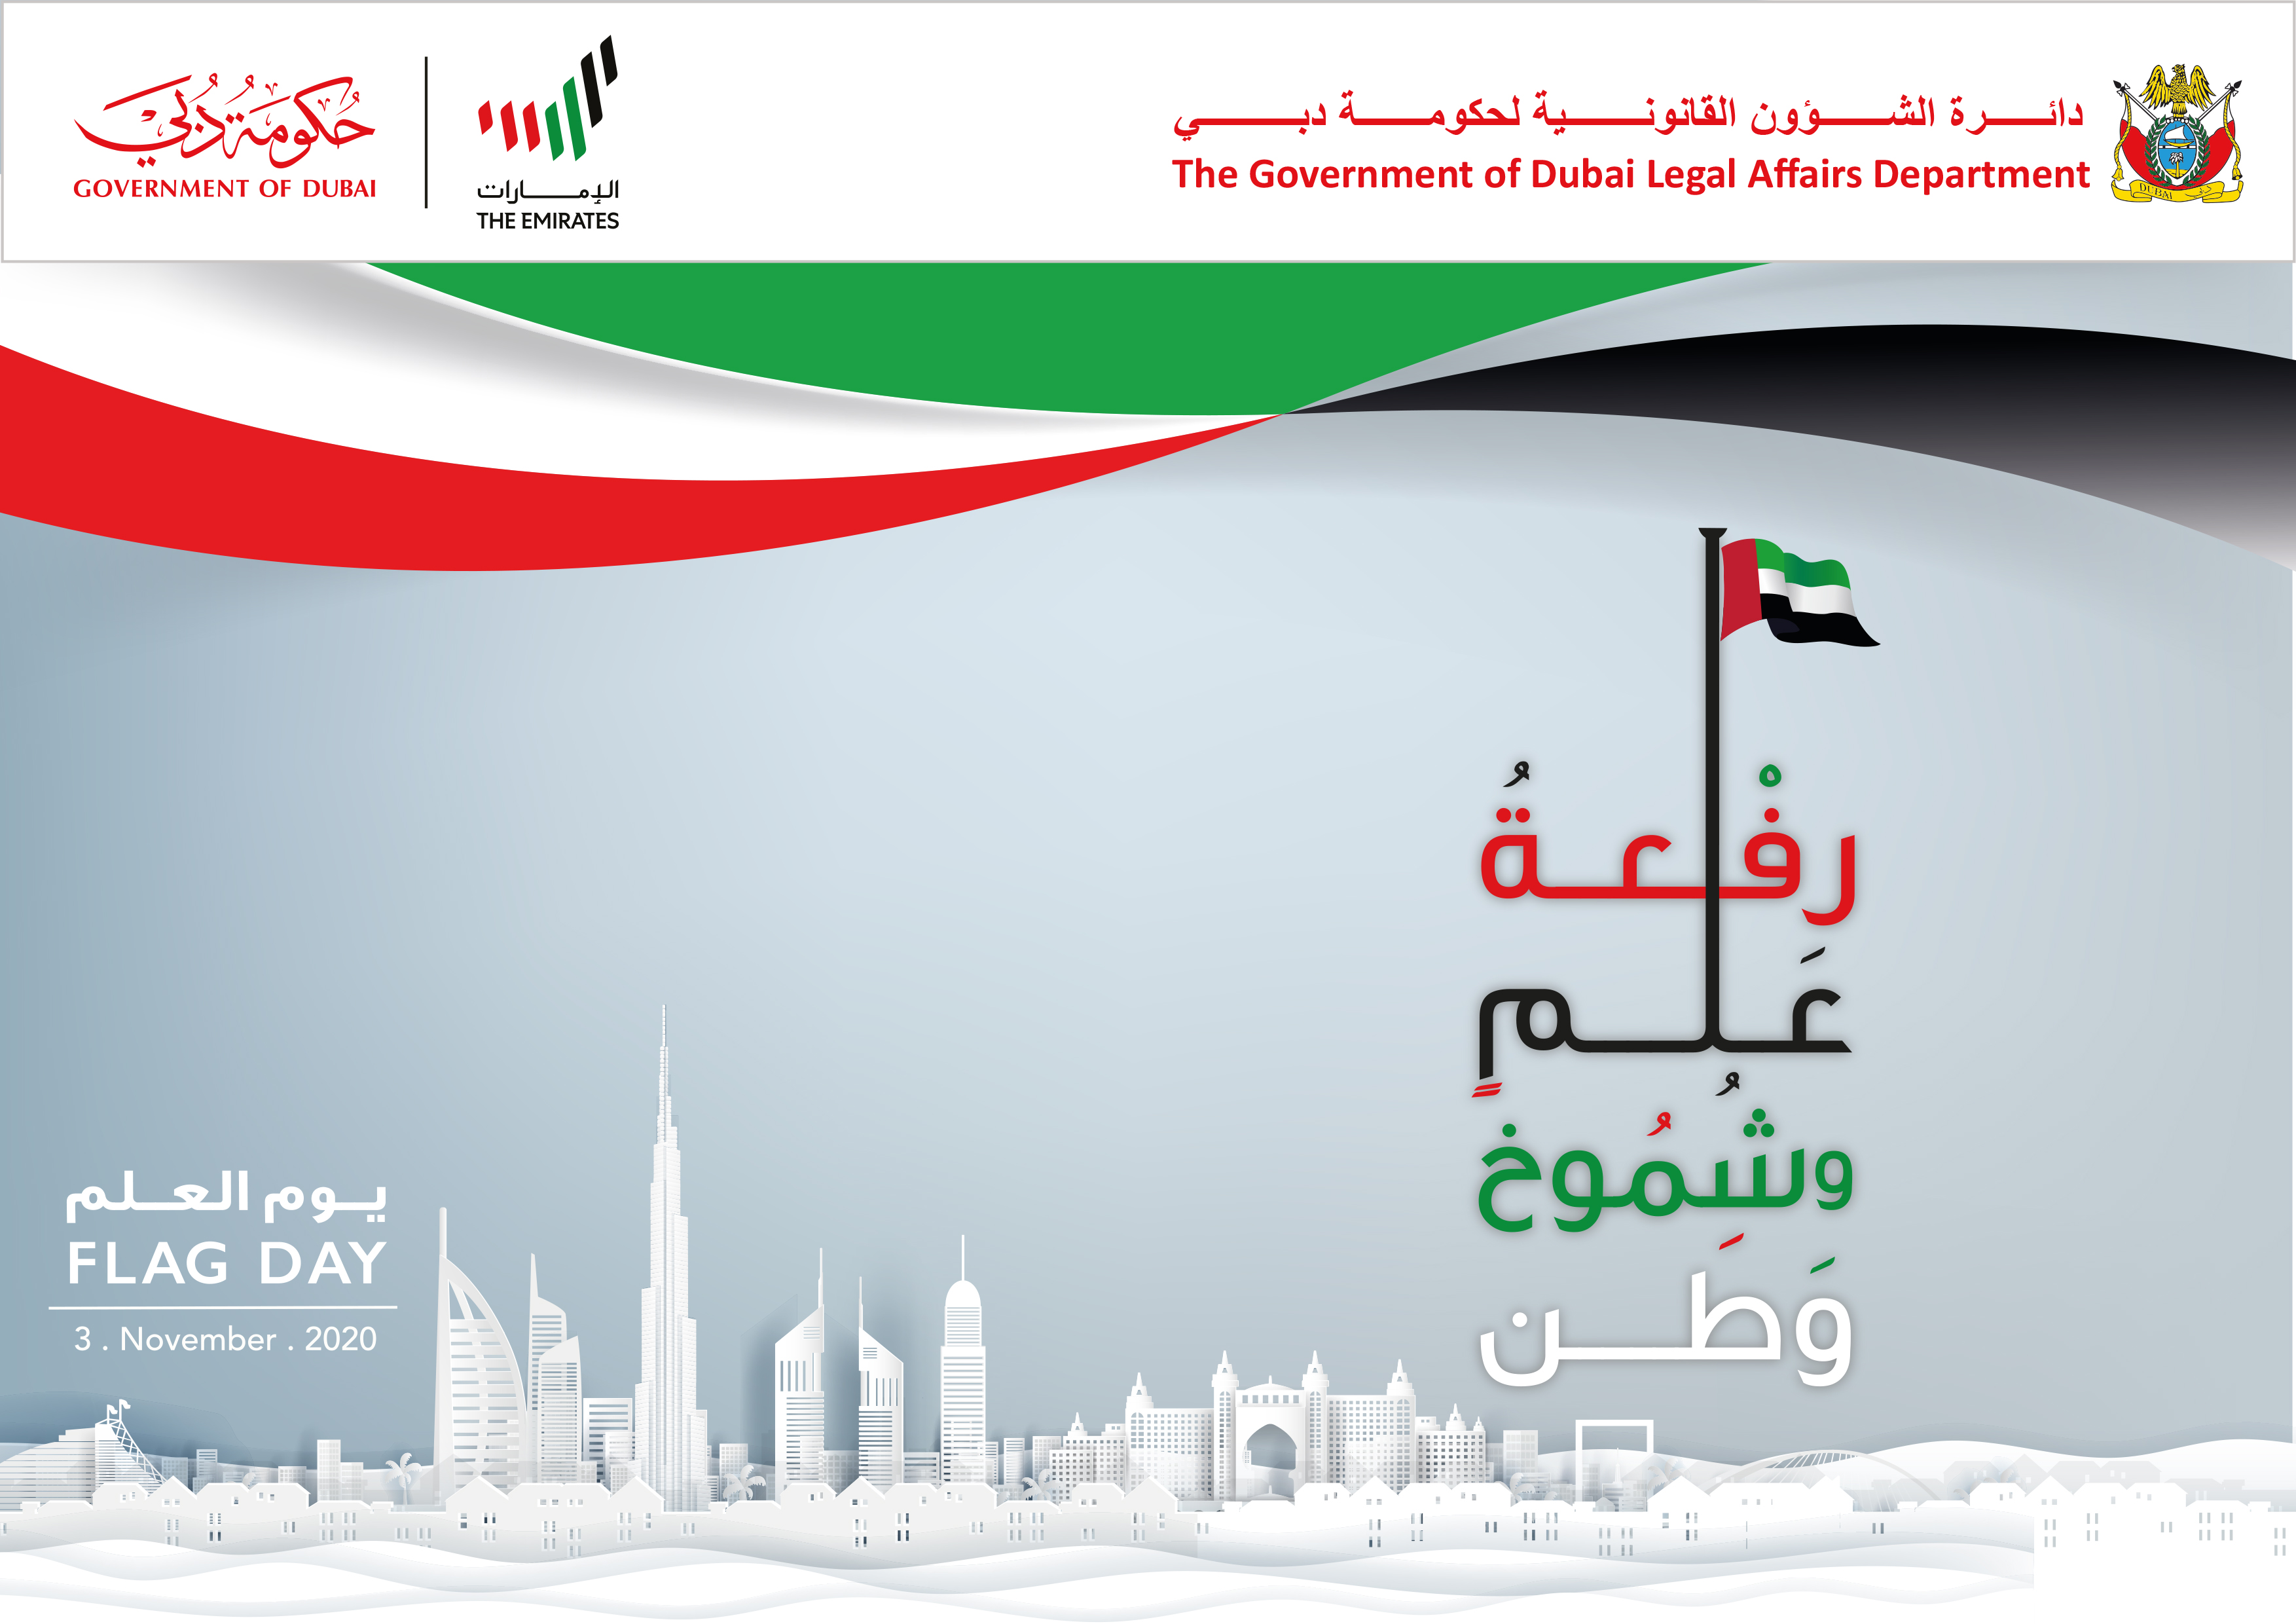 Statement of His Excellency the Director General of the Government of Dubai Legal Affairs Department On the Occasion of the UAE Flag Day